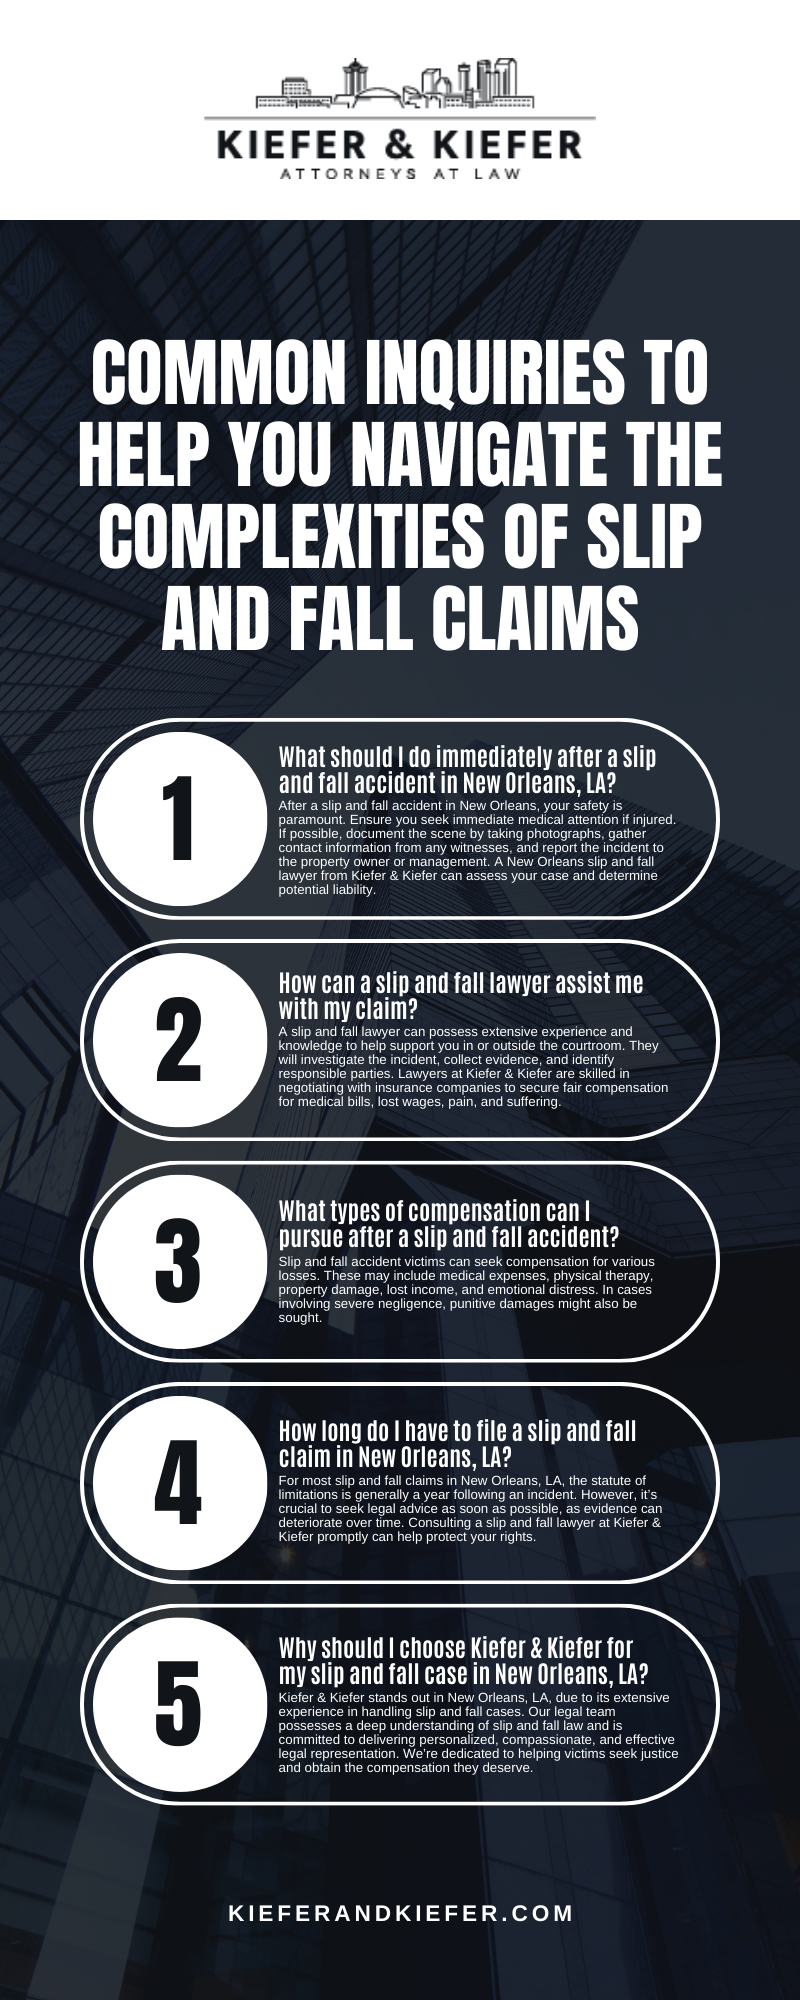 Common Inquiries To Help You Navigate The Help You Navigate The Complexities Of Slip And Fall Claims Infographic